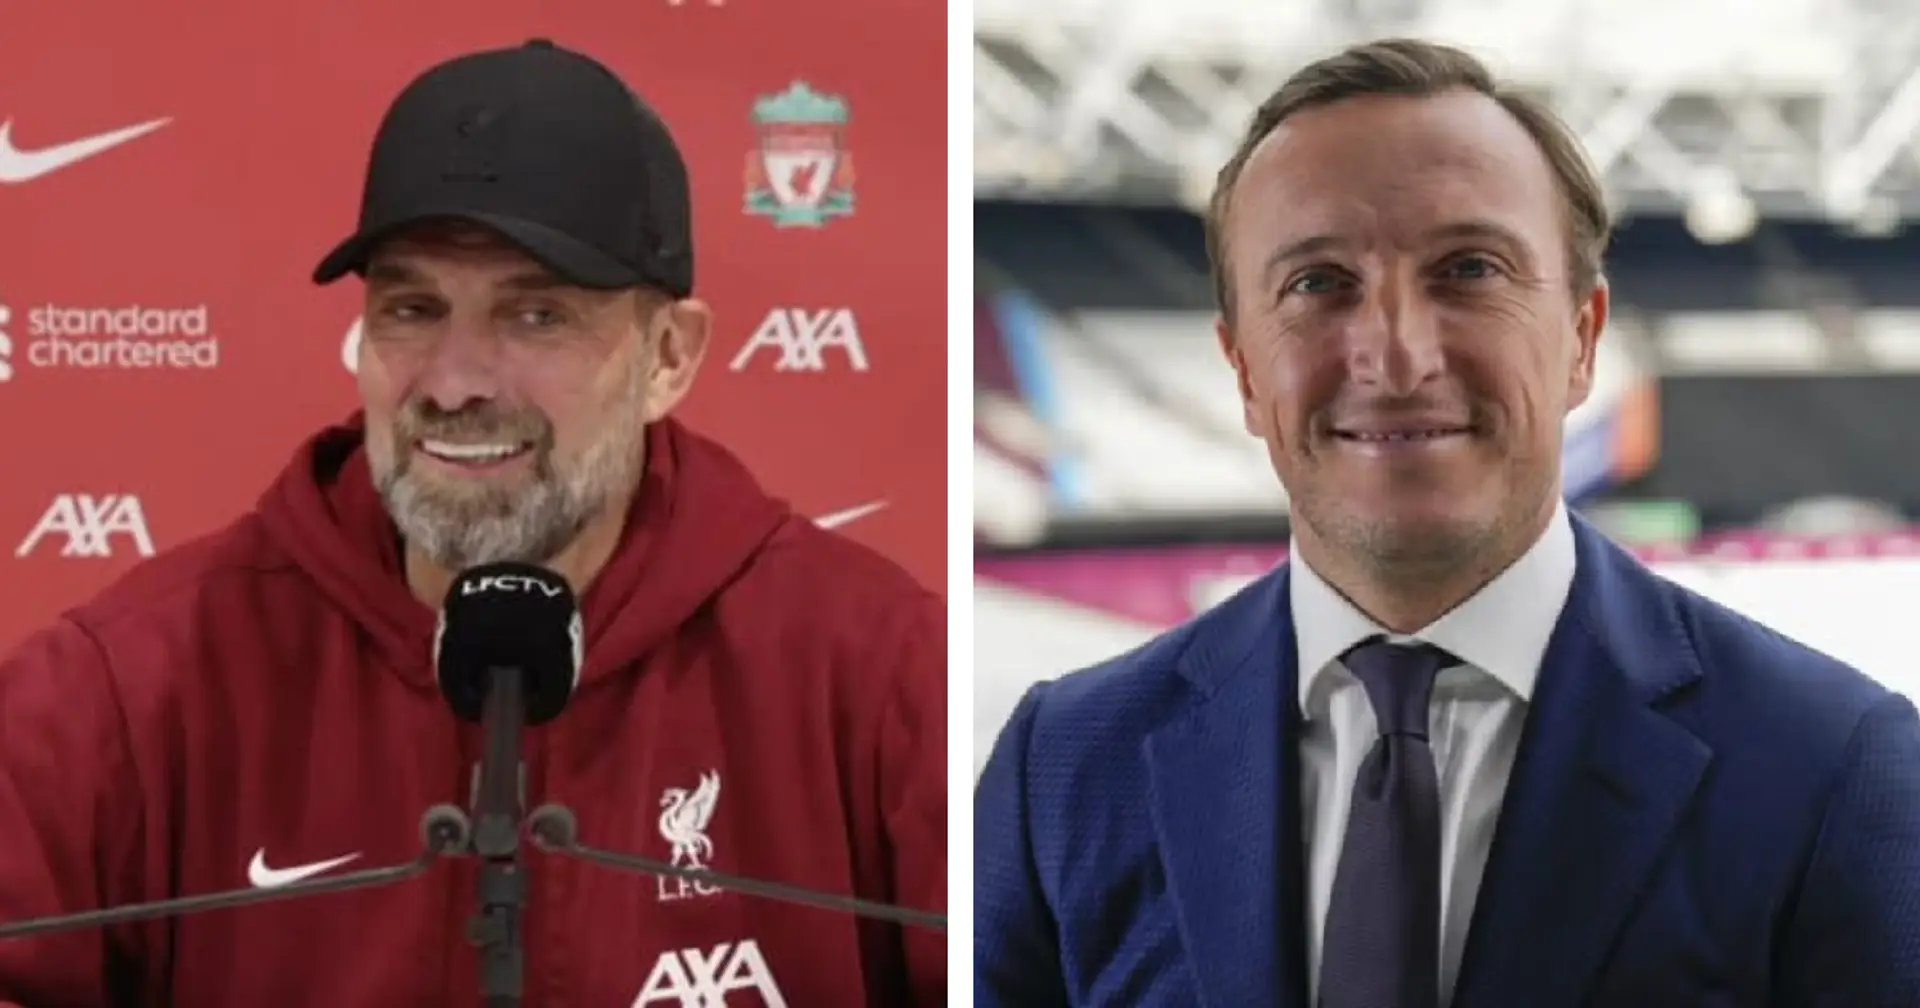 Klopp names West Ham forward as his favourite non-LFC player – sporting director Mark Noble responds